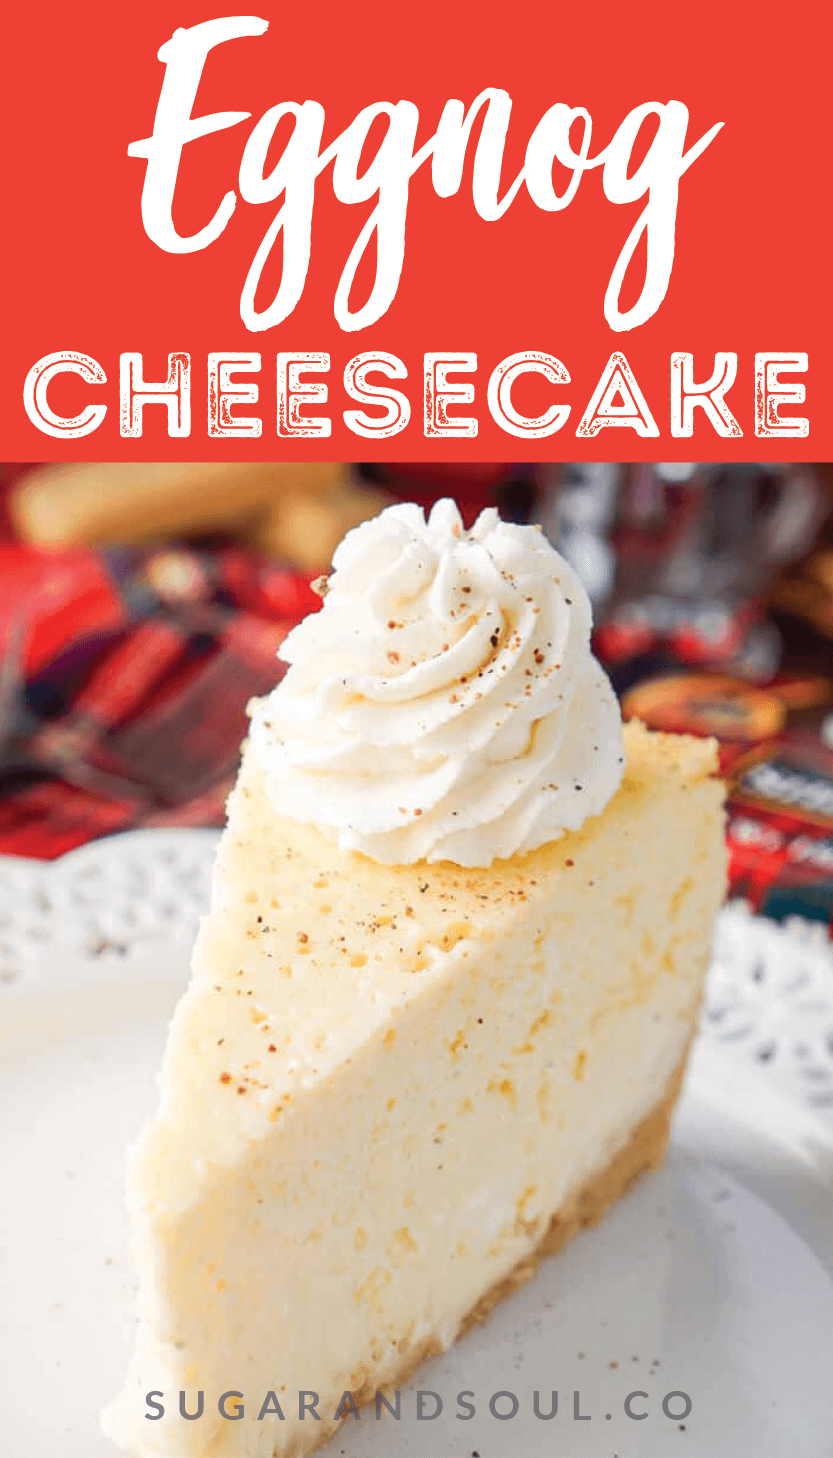 This Eggnog Cheesecake Recipe is enclosed in a sweet shortbread cookie crust and laced with whisky and nutmeg for the ultimate holiday dessert!